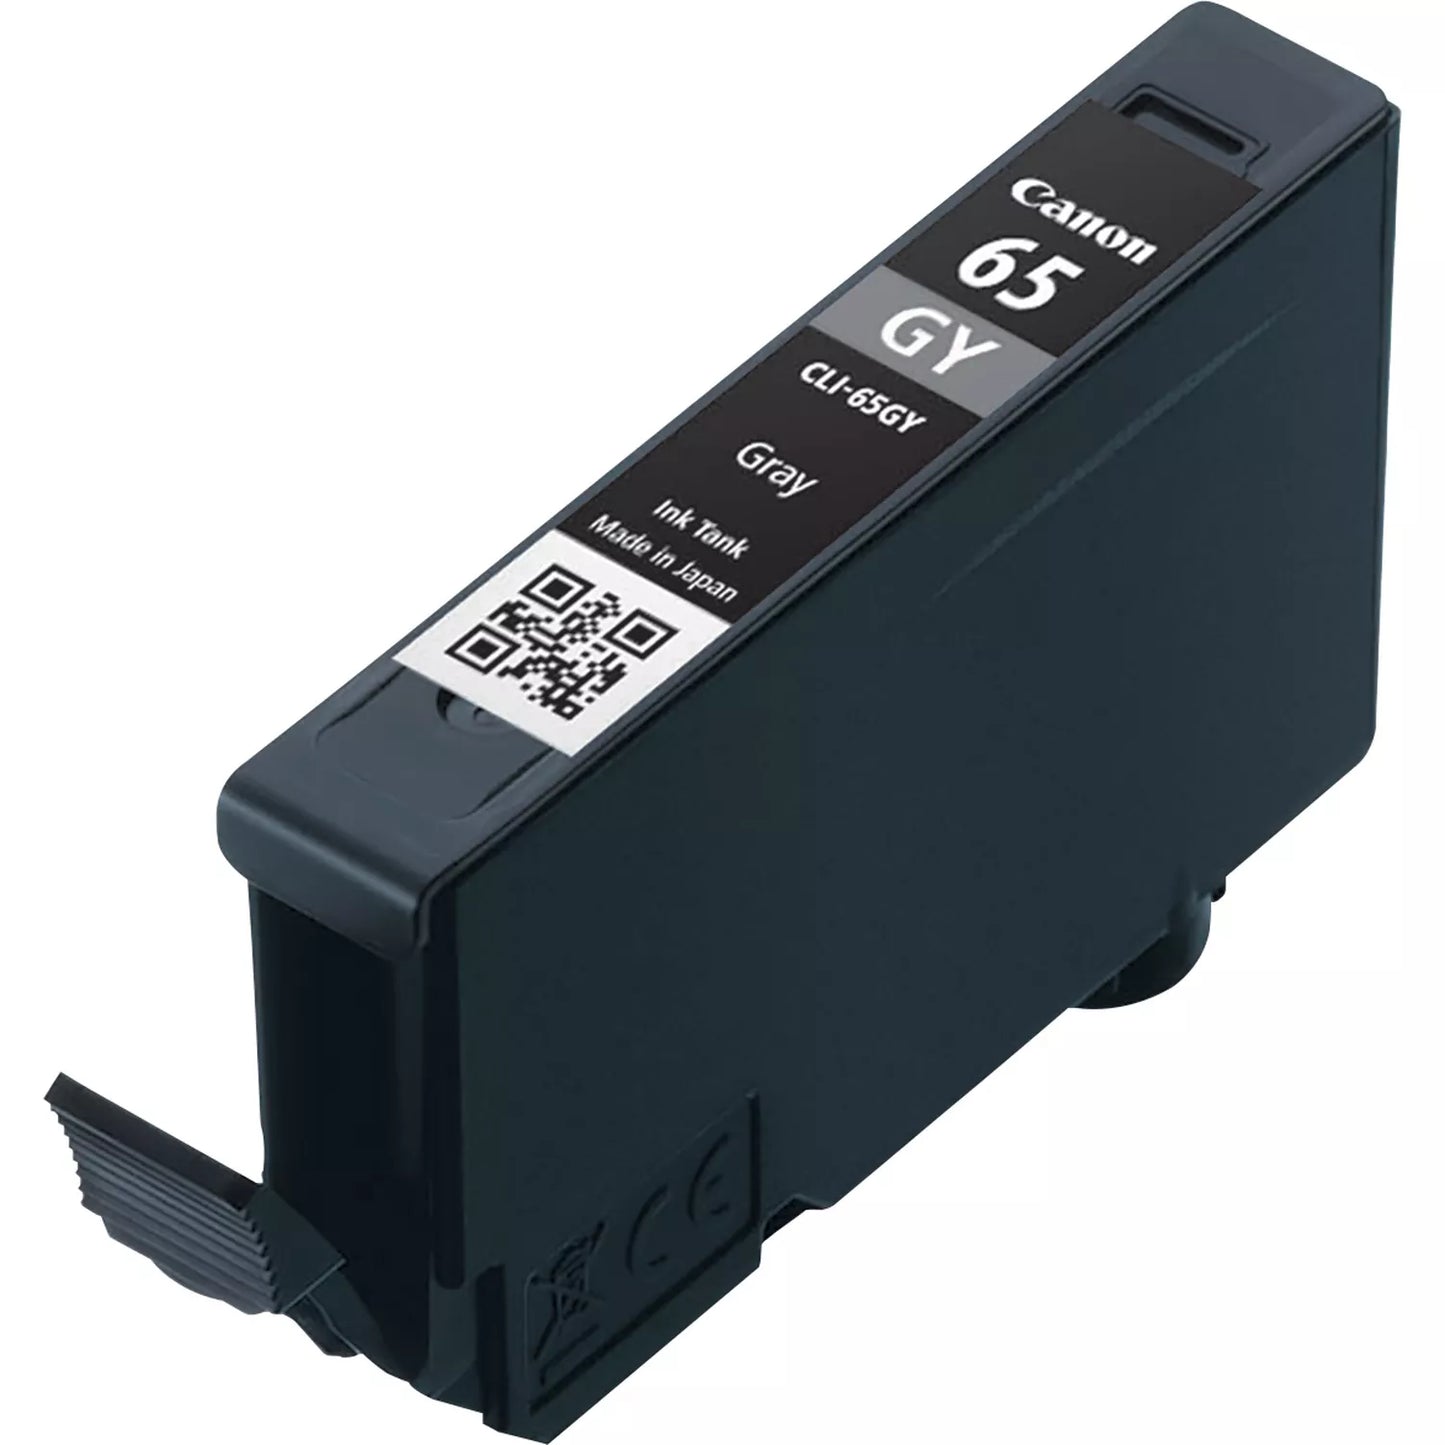 Canon CLI-65GY Ink Cartridge | Pro 200 | Grey